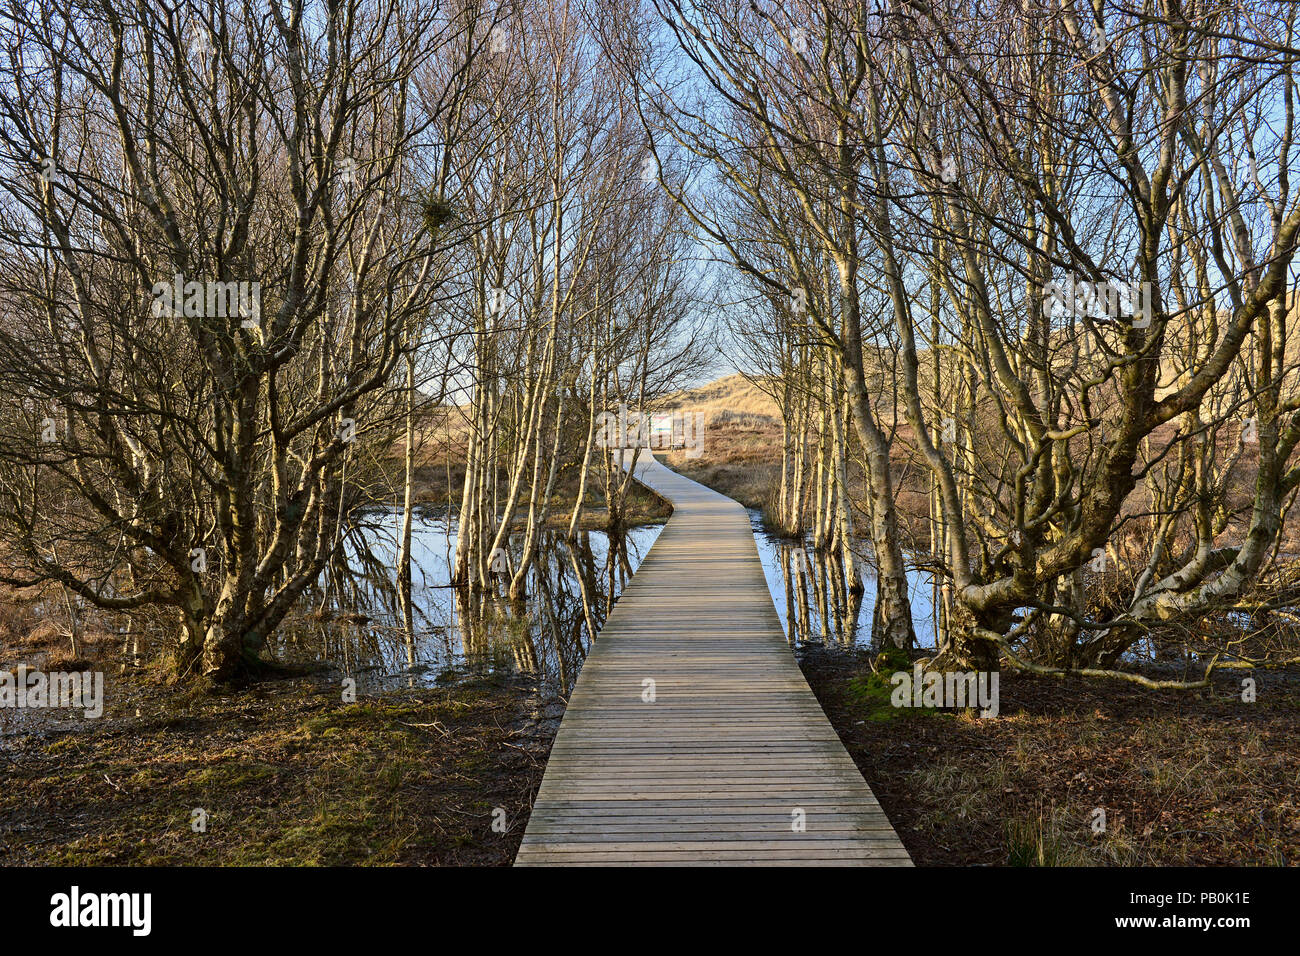 Boardwalk path between birch trees and water of the Bruchwald forest, Amrum, North Frisia, Schleswig-Holstein, Germany Stock Photo